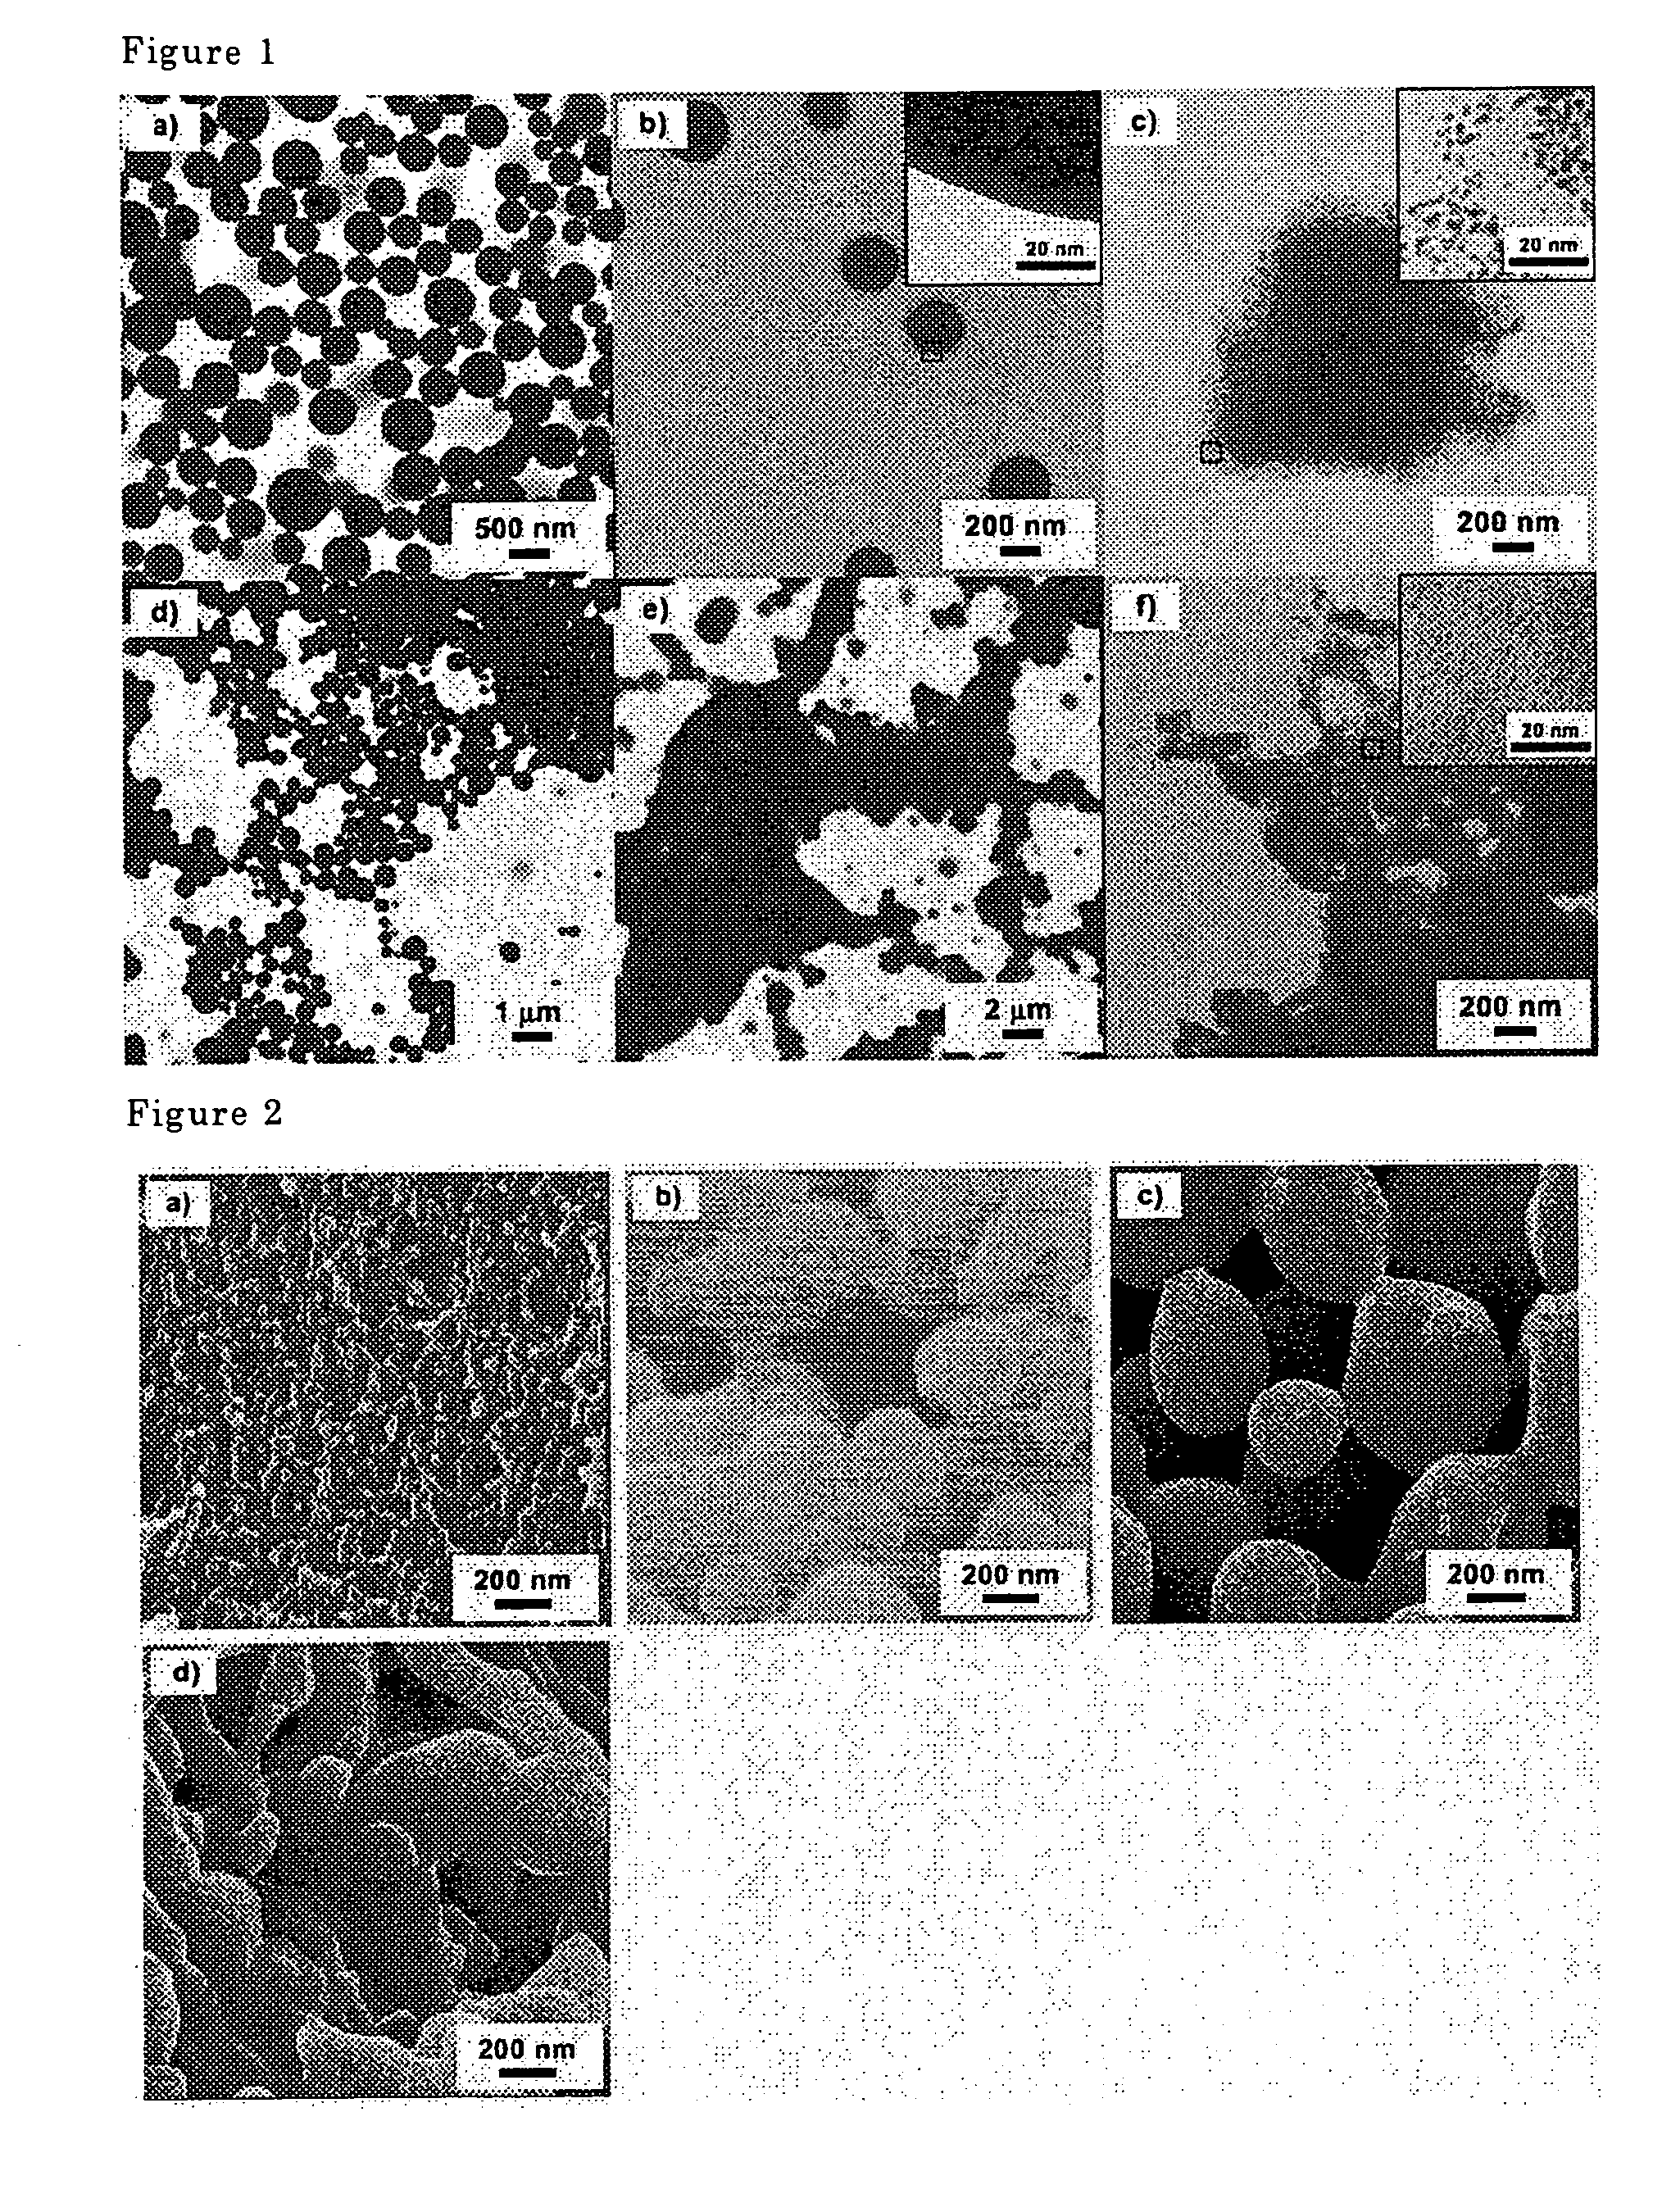 Polymer-Supported Metal Cluster Composition